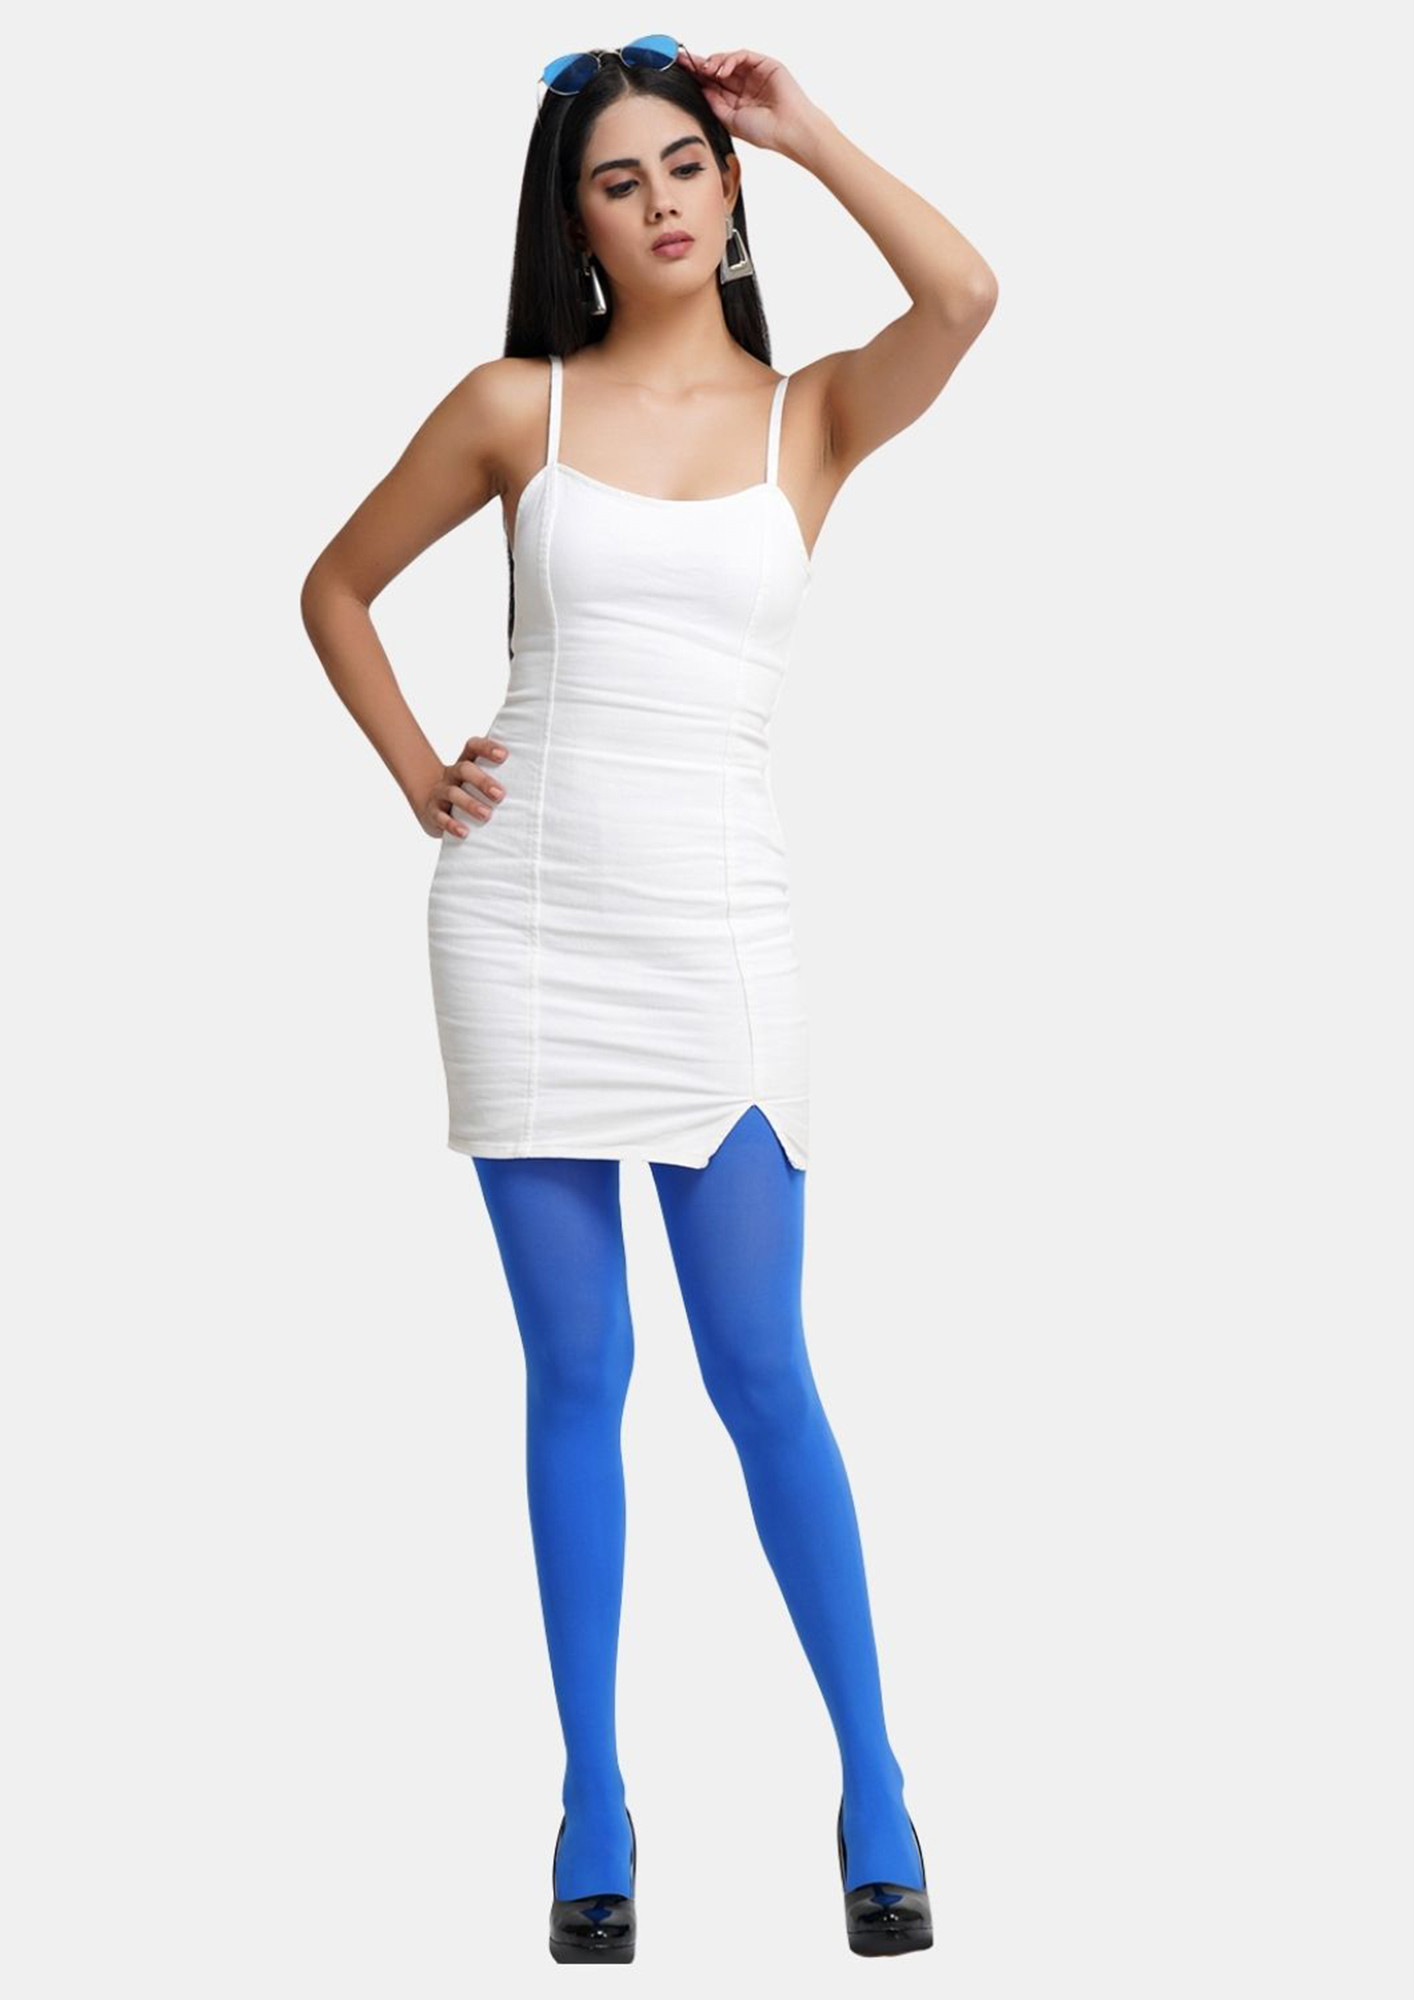 Blue Nylon Opaque Tights for Women